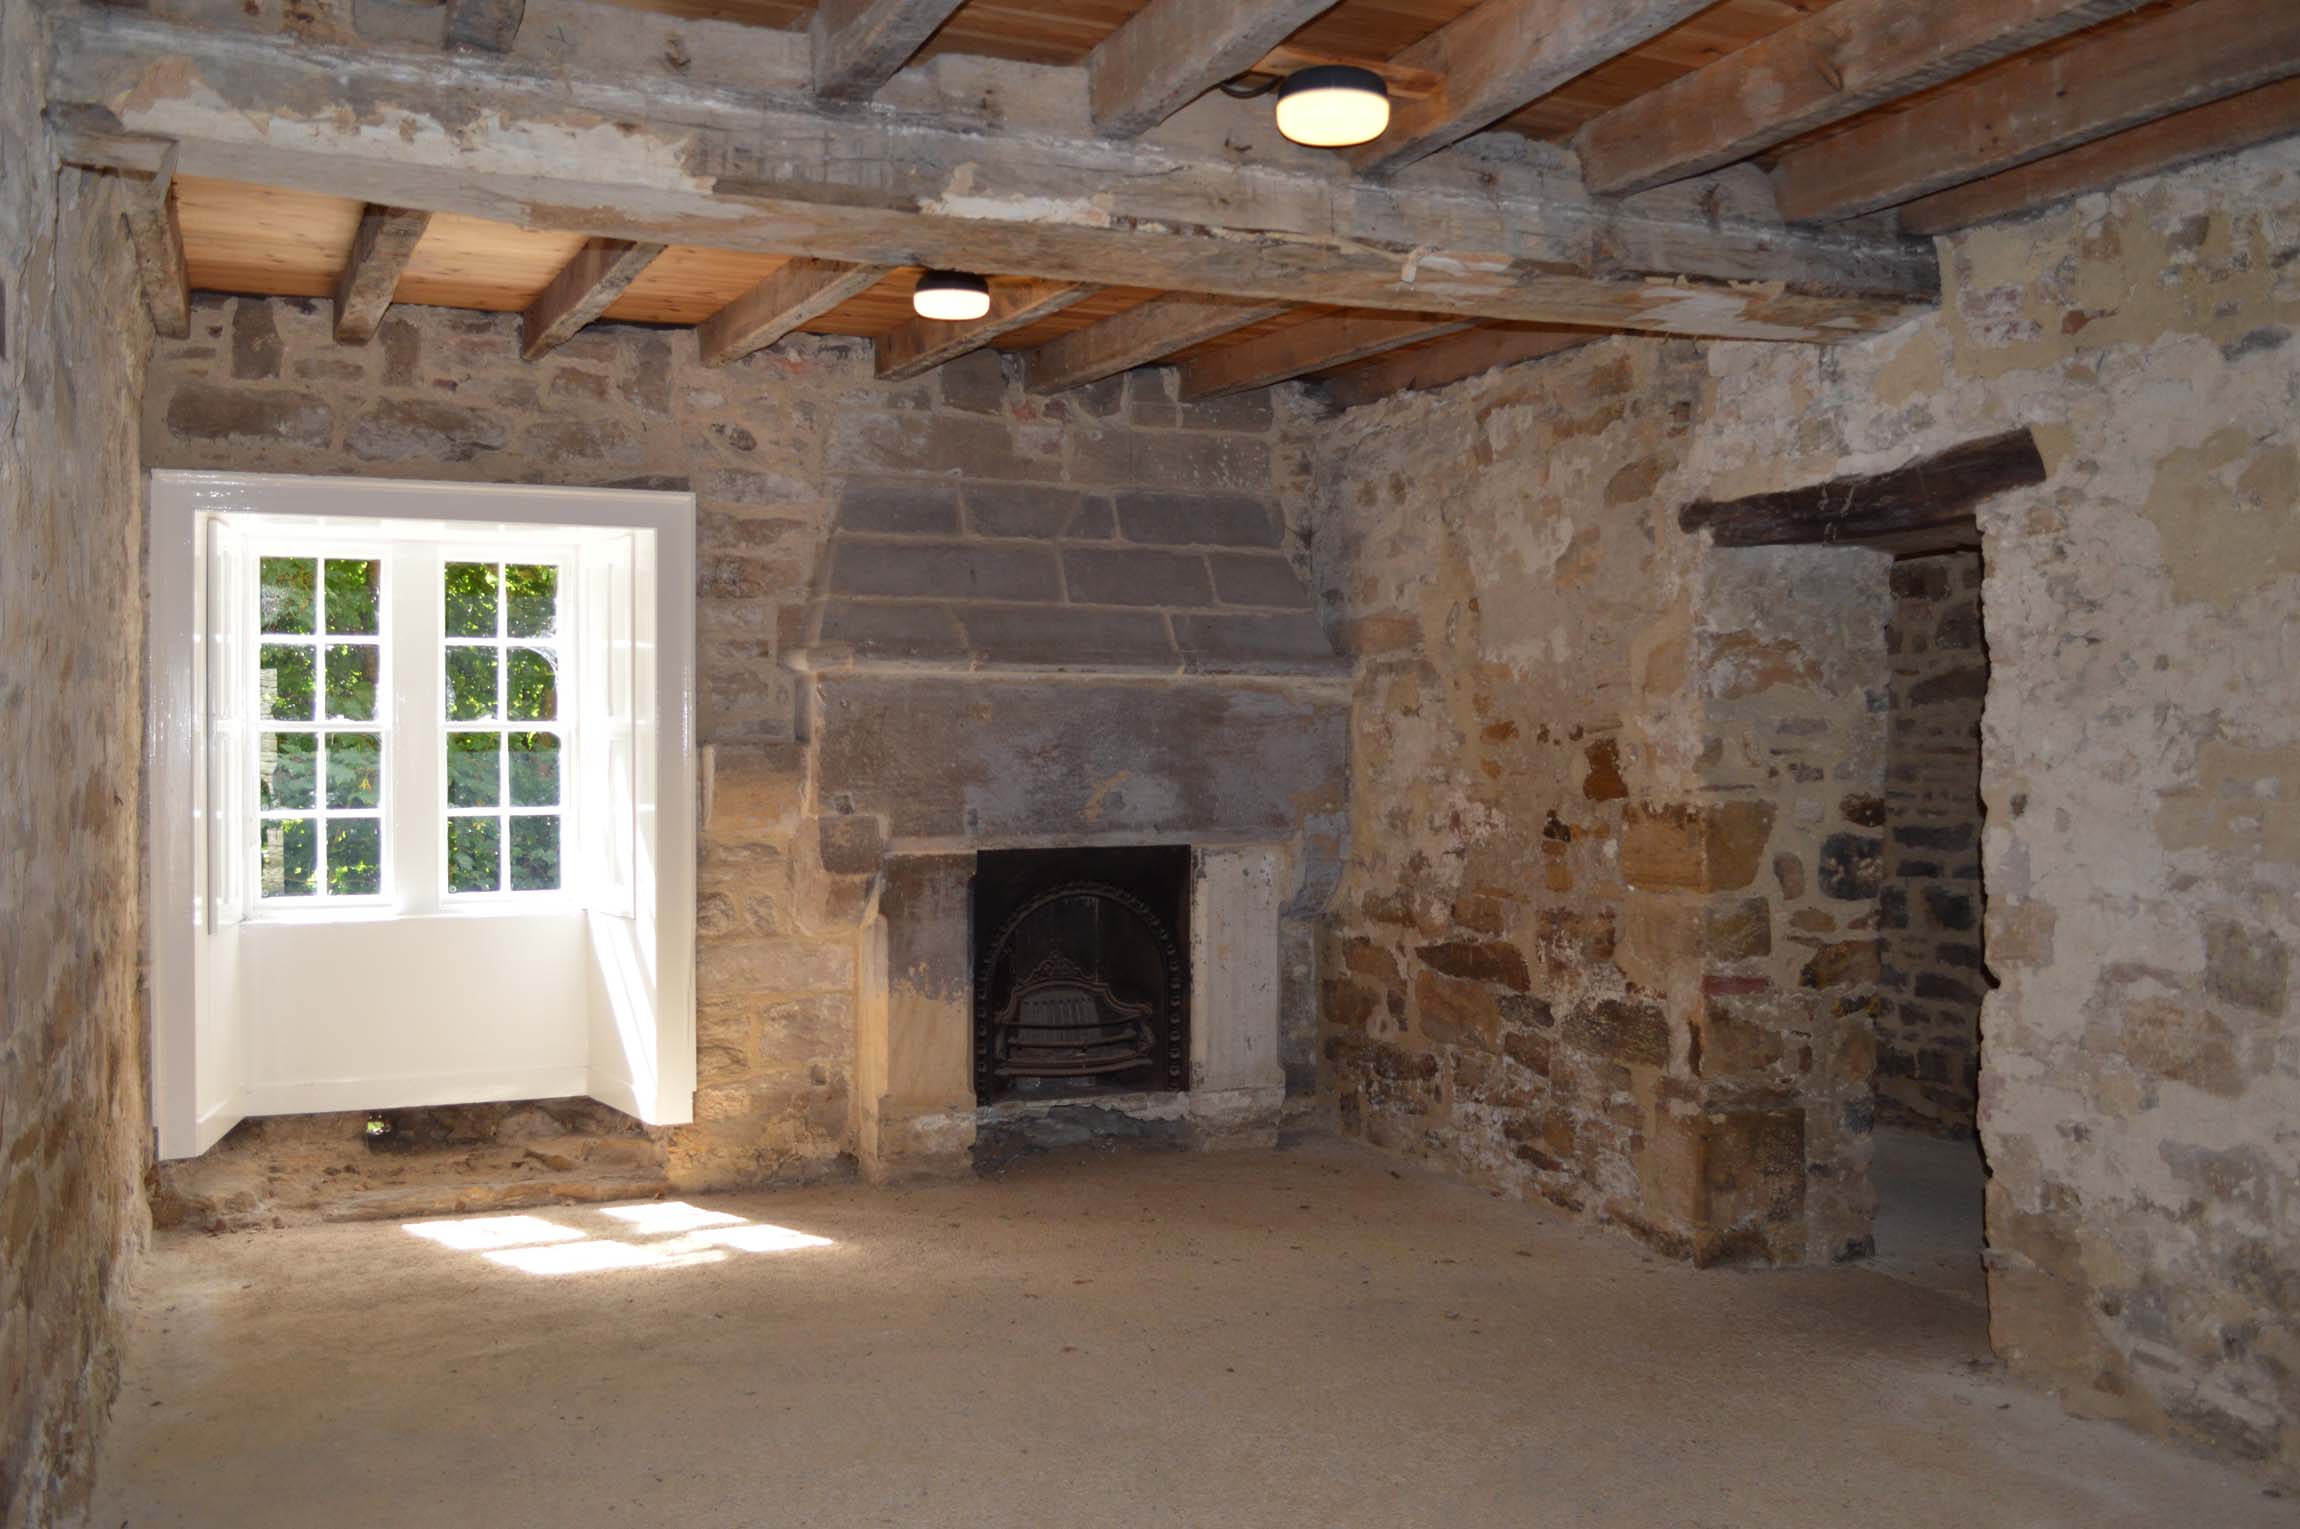 this room has stone walls and windows on both sides